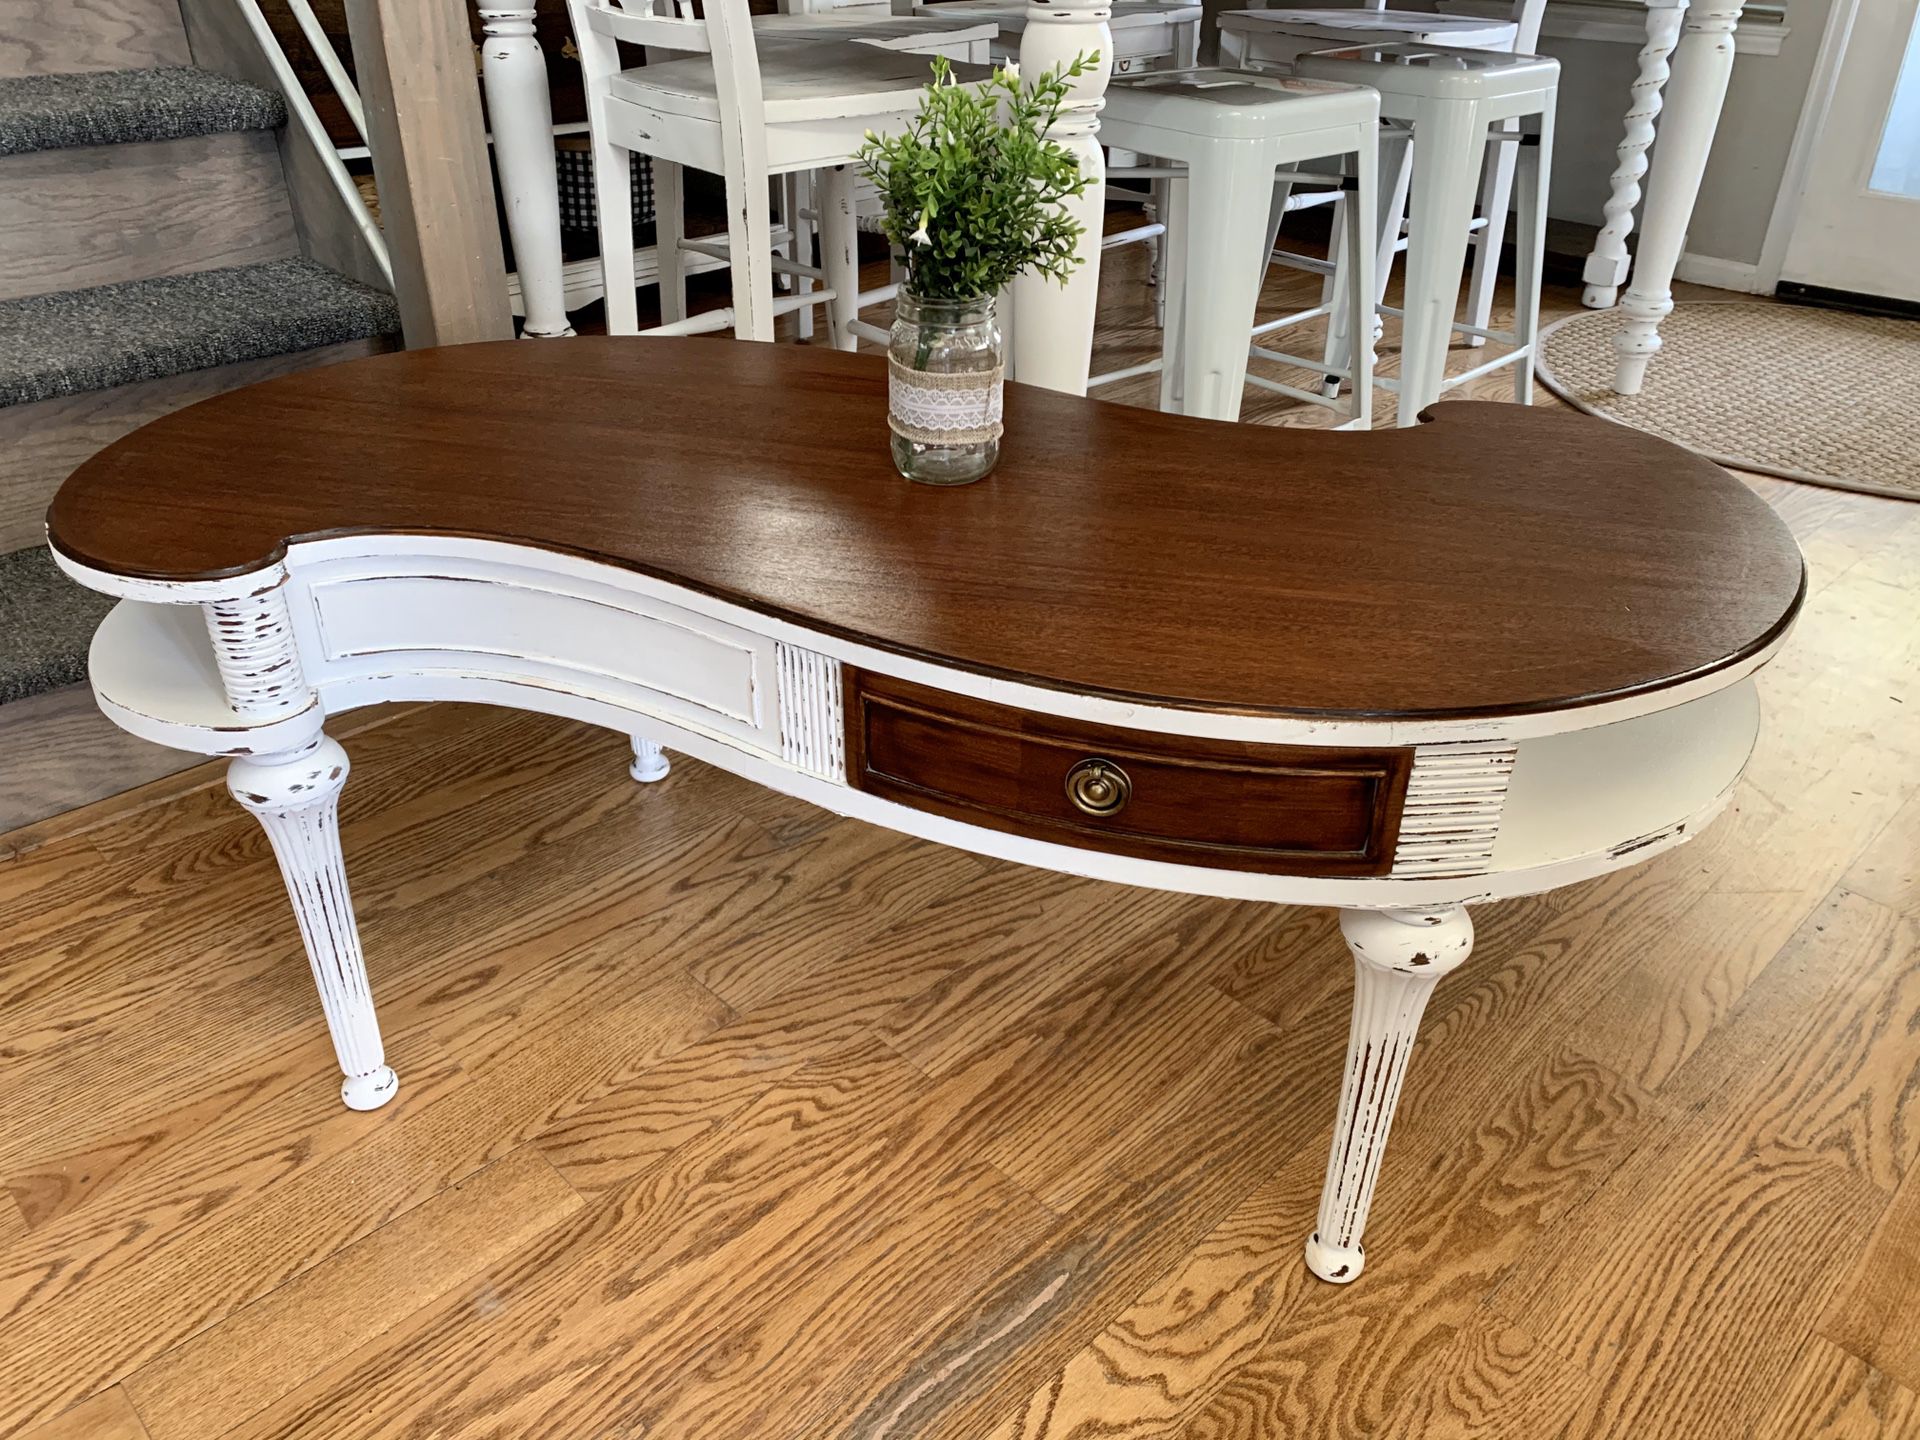 Super old unique dainty coffee table